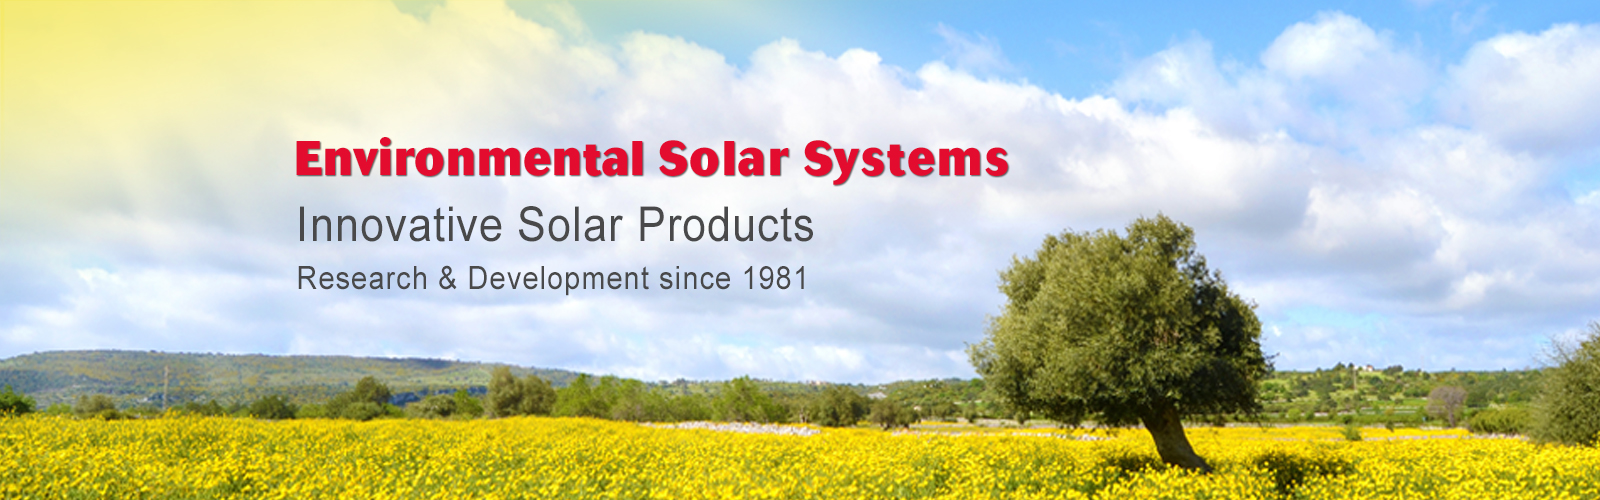 Innovative Solar Products